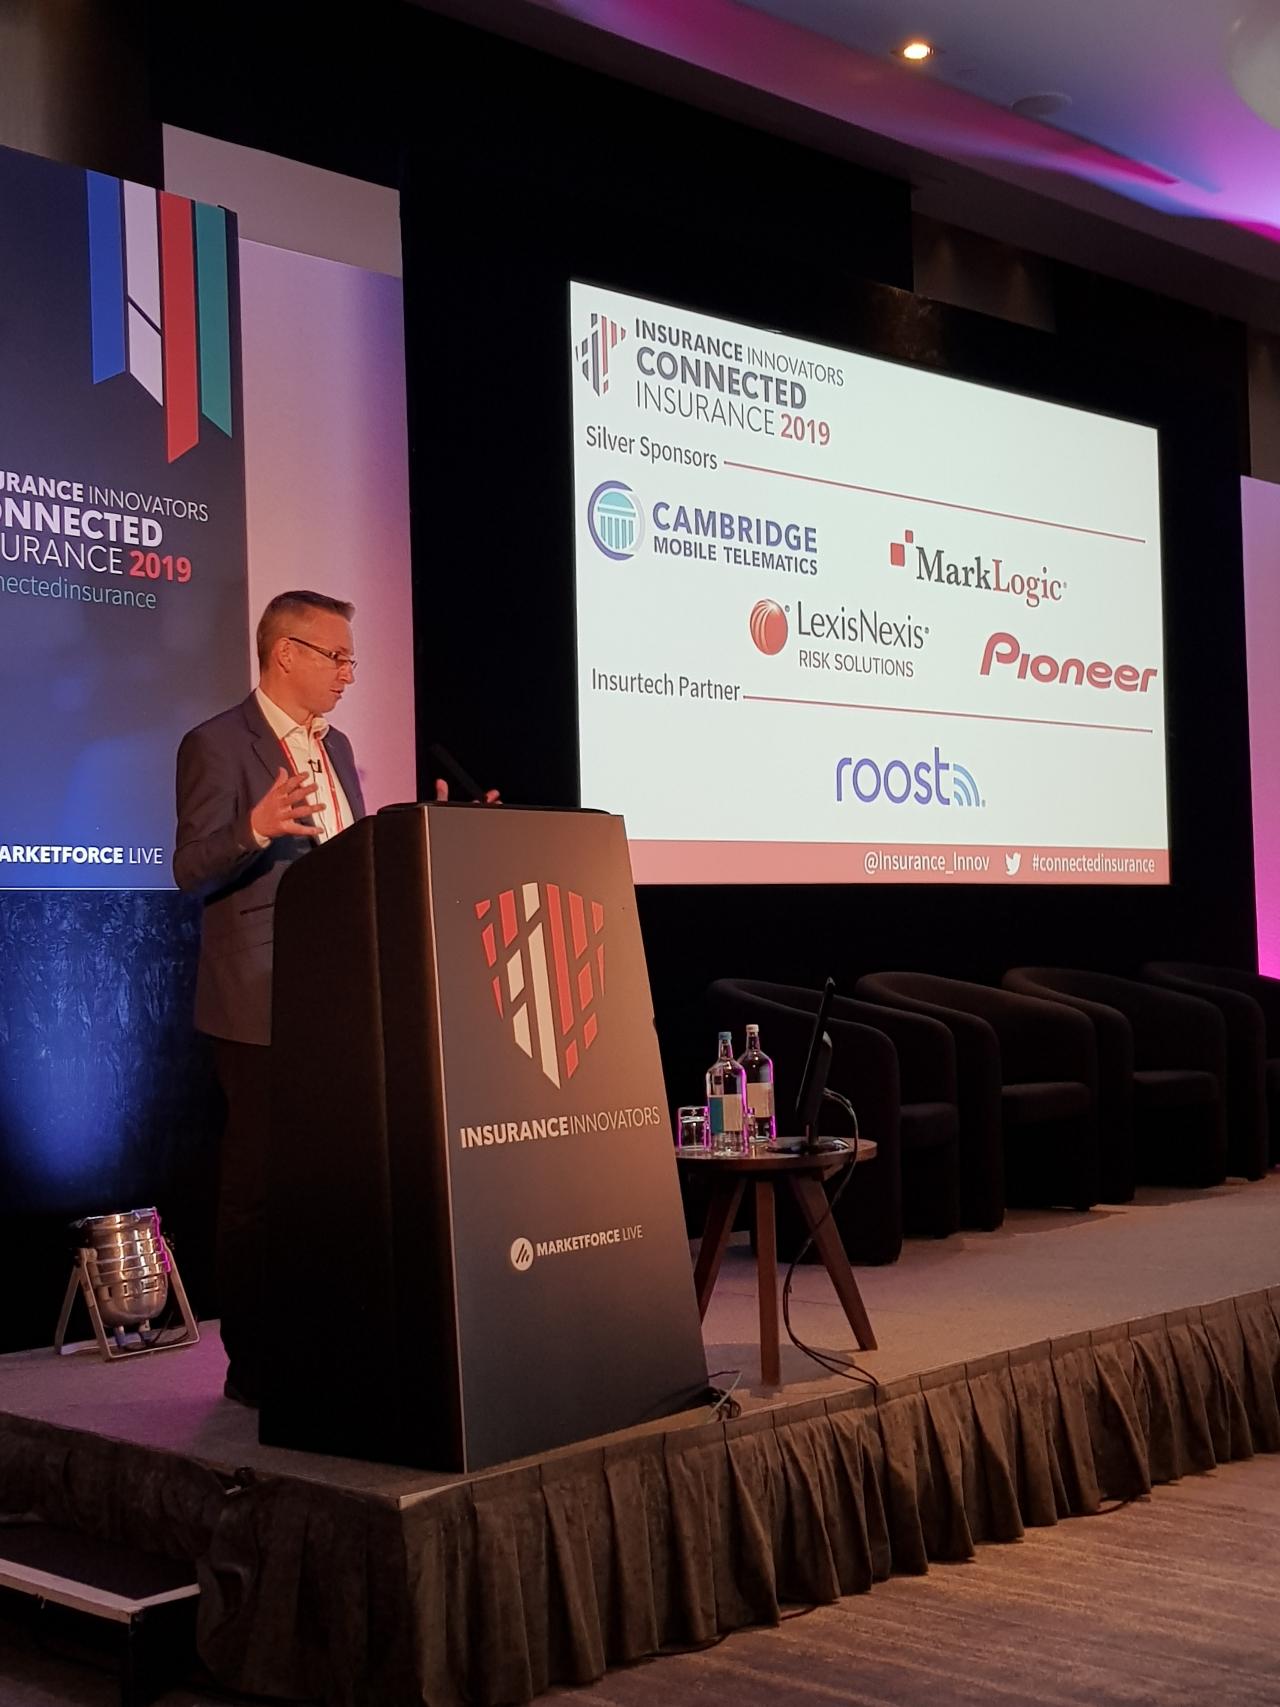 Chairing the Insurance Innovators Connected Insurance conference in